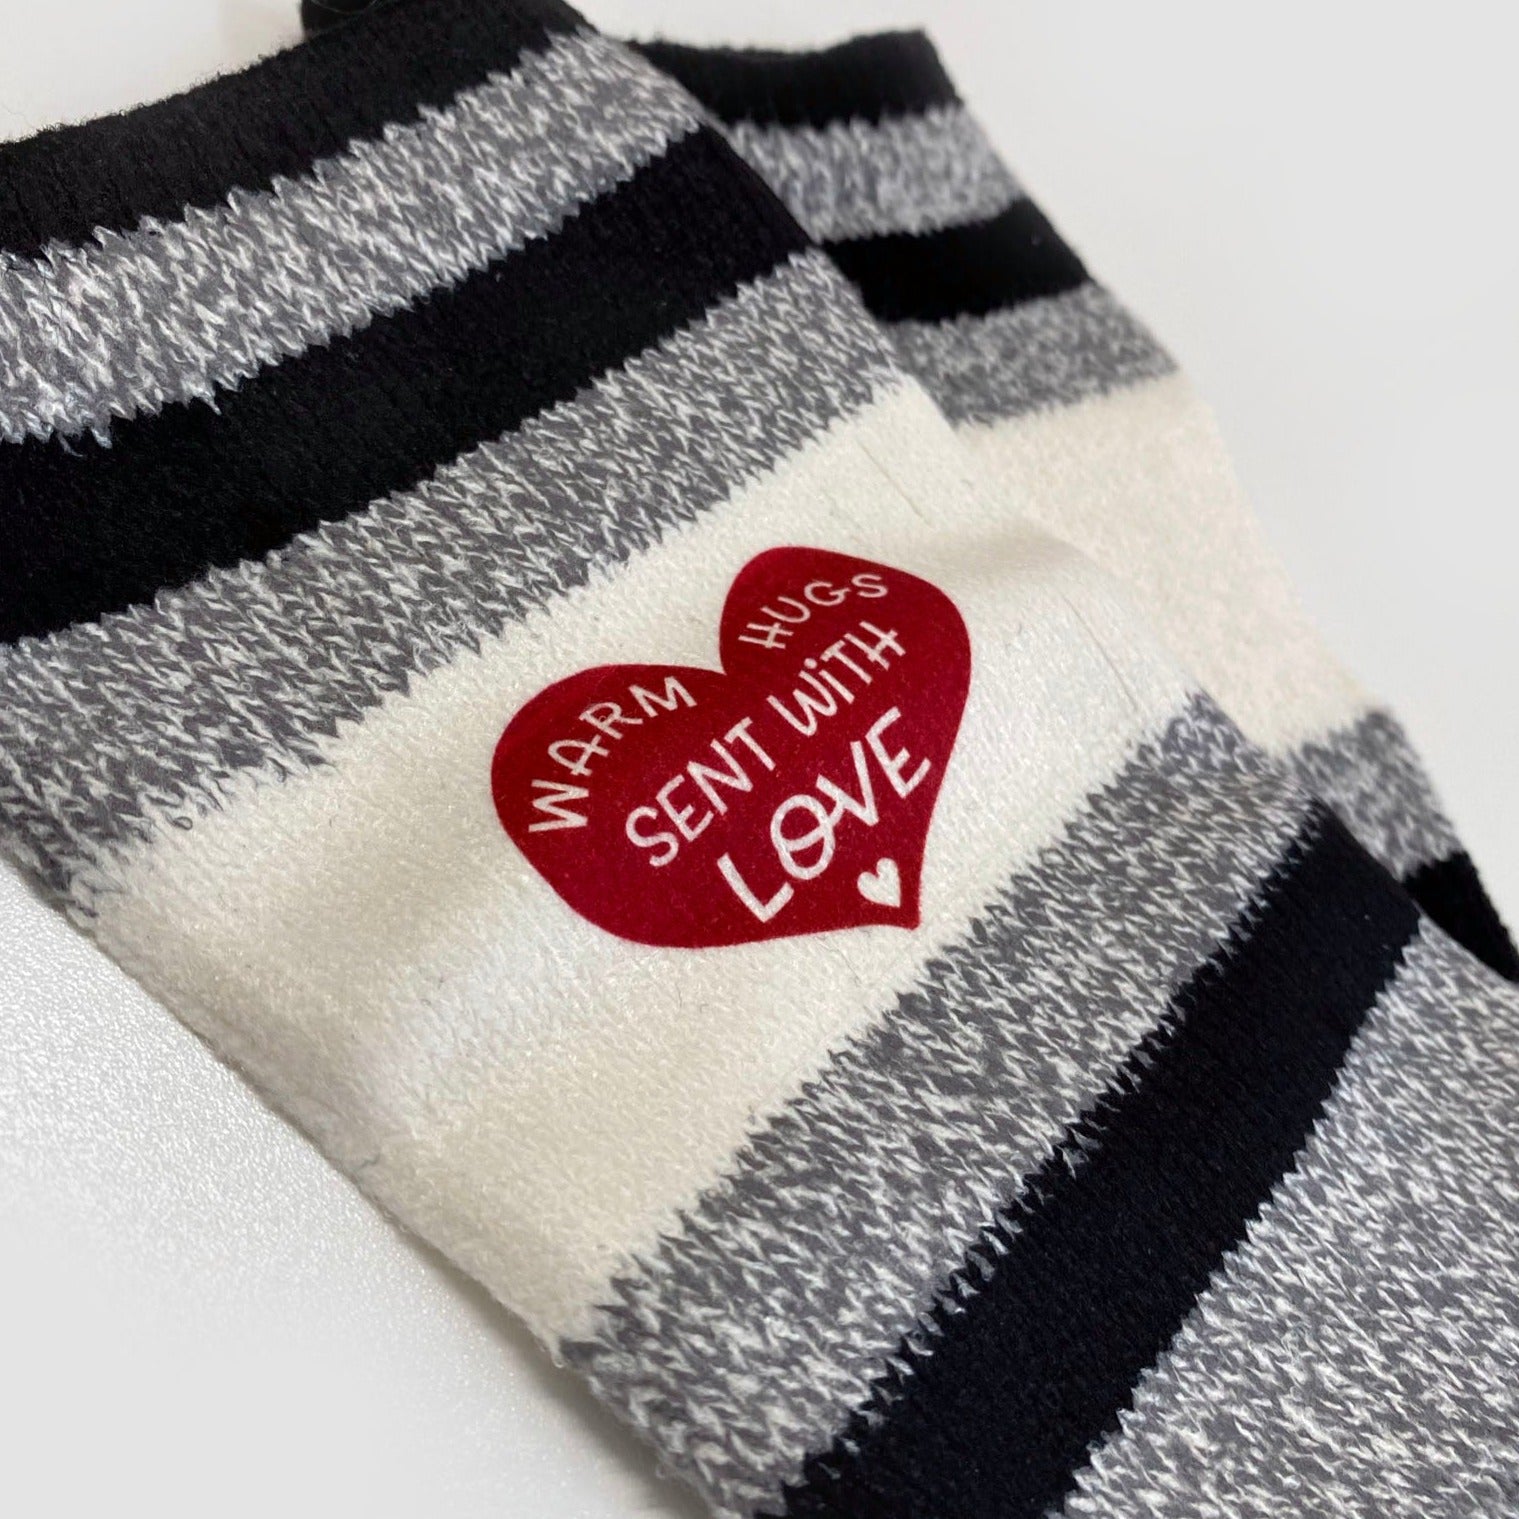 Gray and Black Socks with a wide white Stripe with a red heart that says, "Warm Hugs sent with Love" with a small white heart at the bottom.